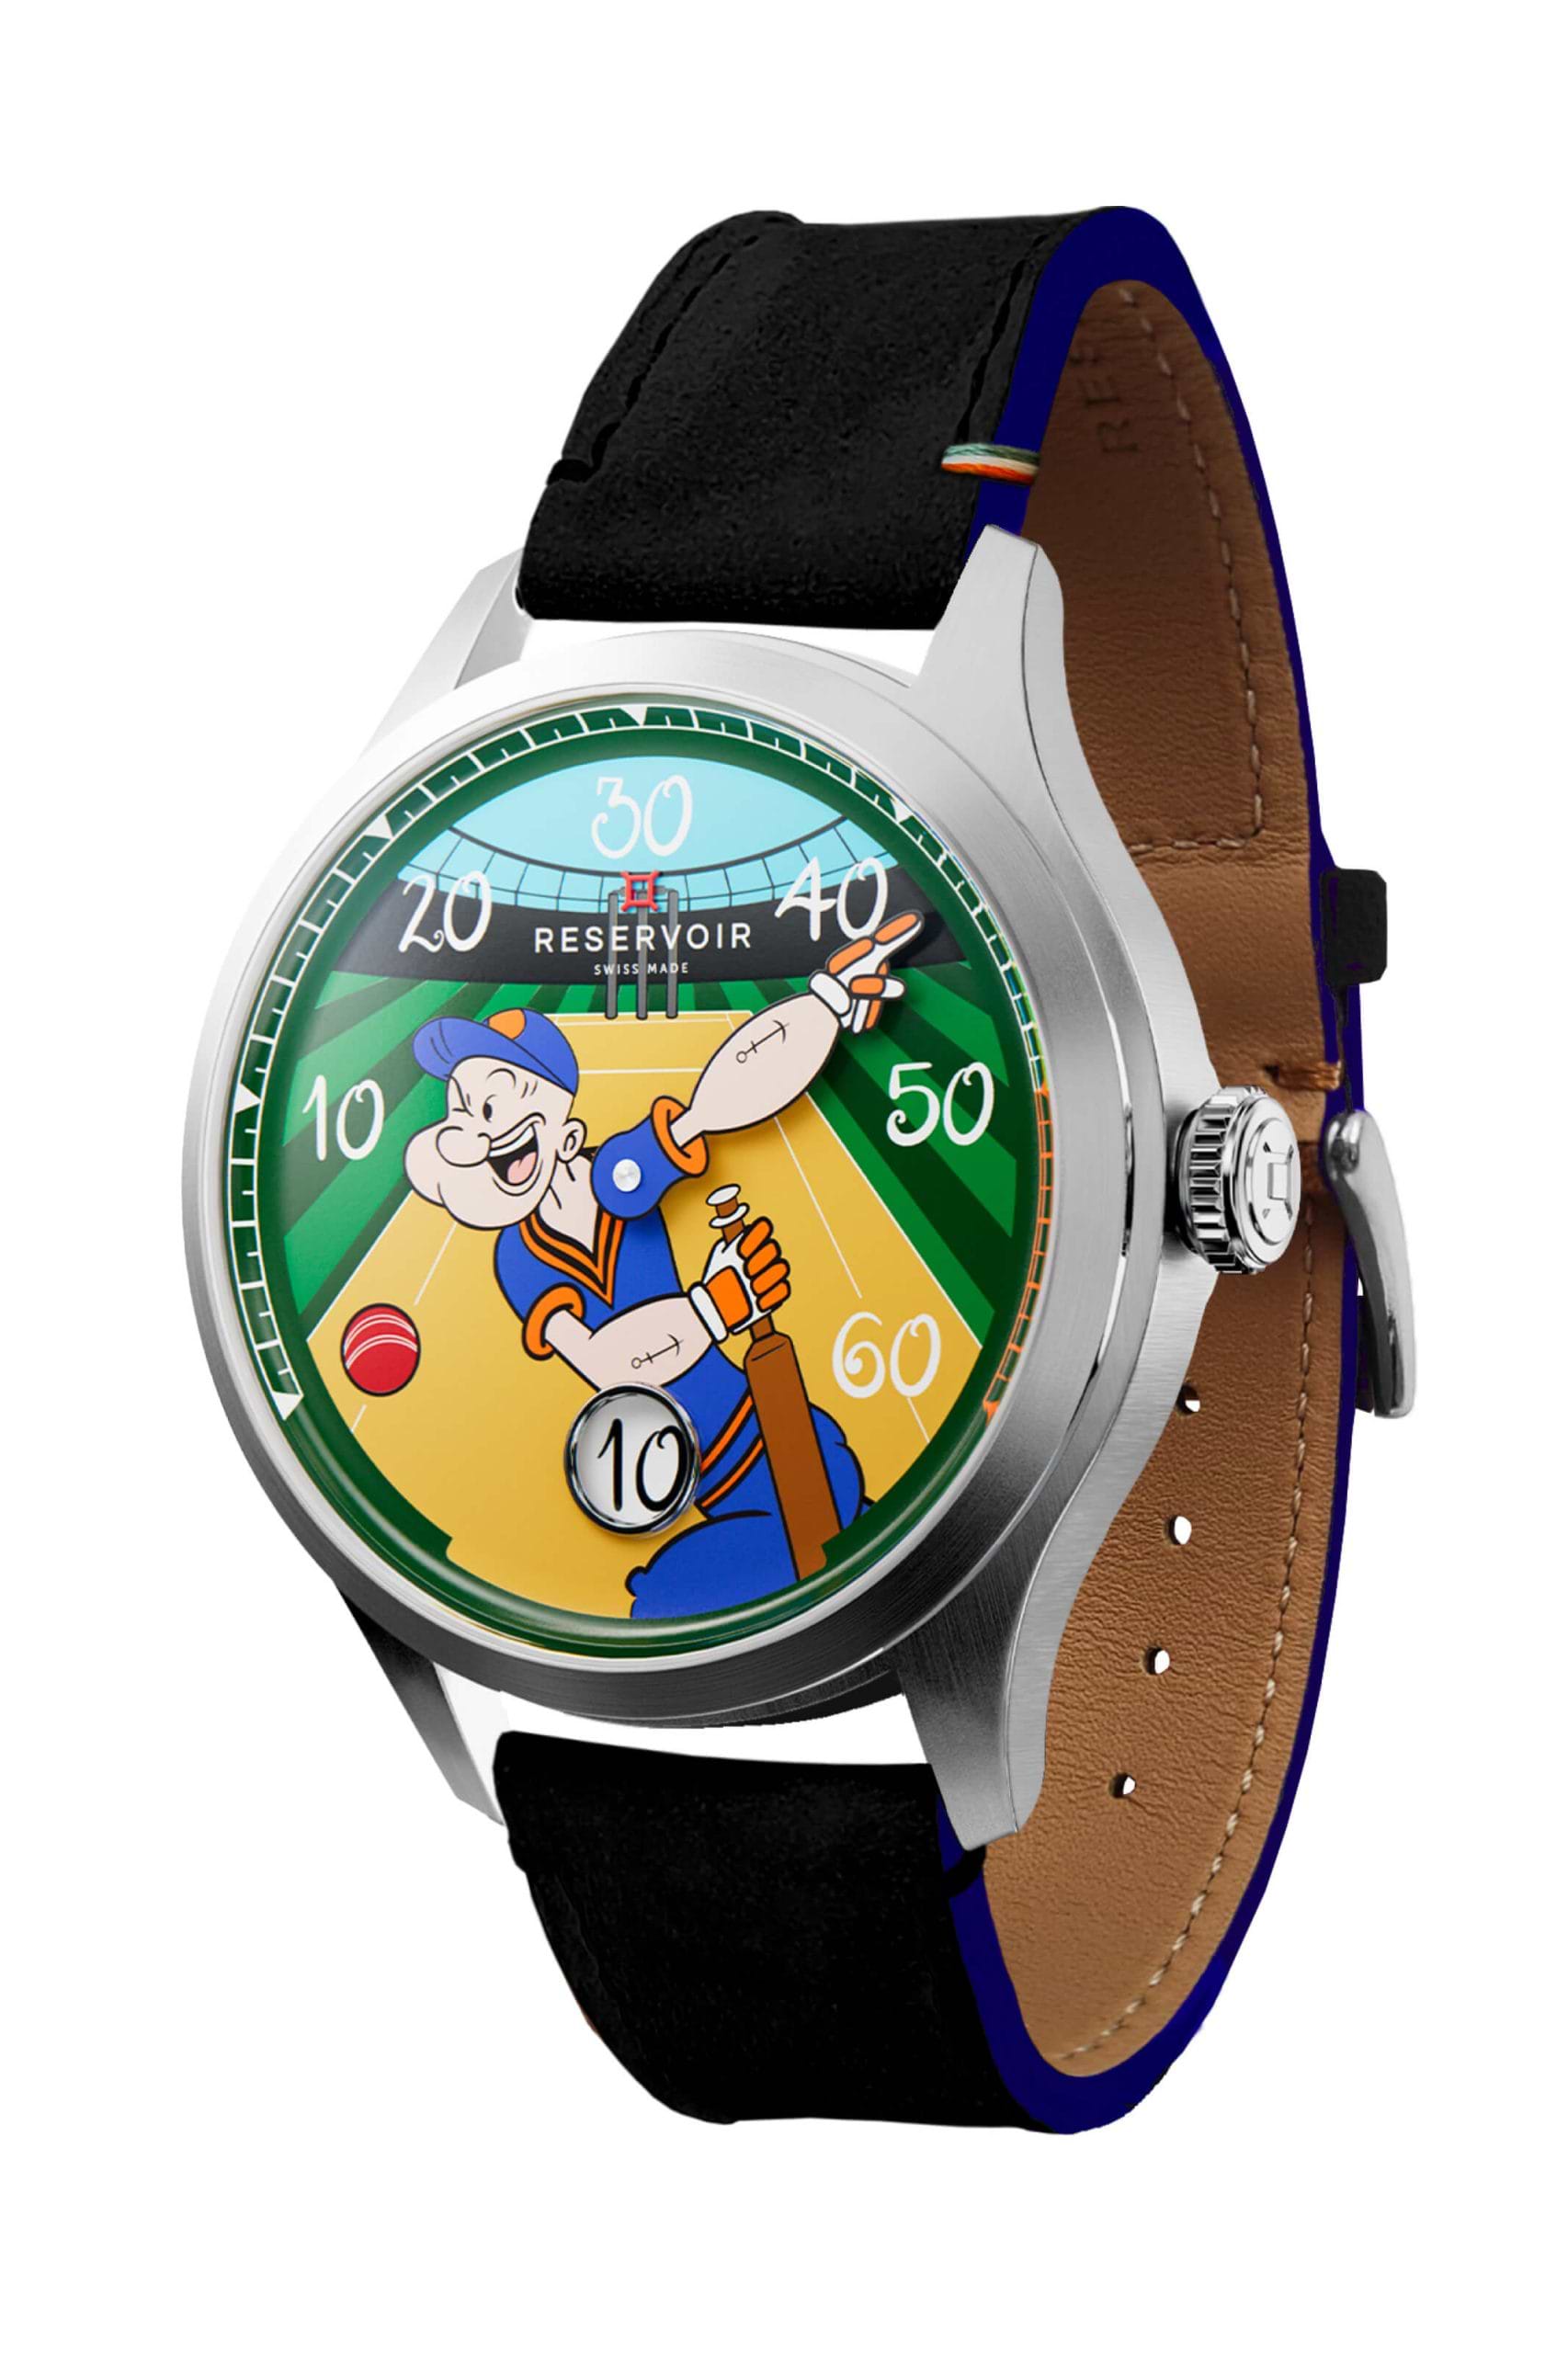 Popeye and Cricket from India, wearing a Dark Brown and Light Beige RESERVOIR watch, in a Light Teal comic panel.